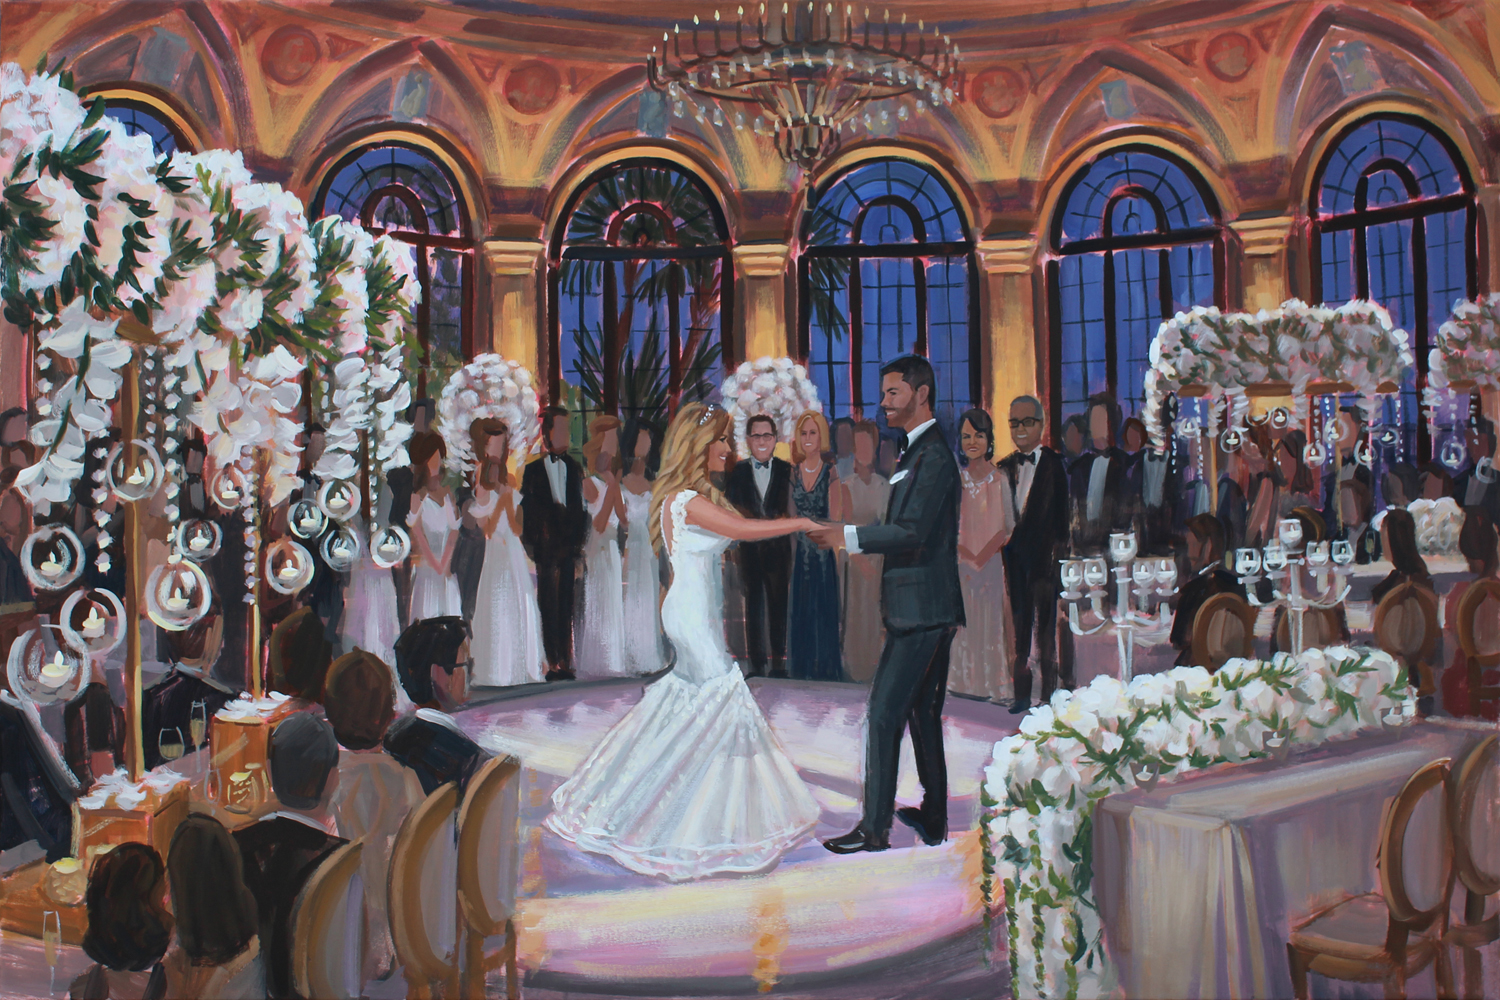 Live Wedding Painter, Ben Keys, captured Molly + Dalton’s stunning first dance at The Breakers in Palm Beach, FL.